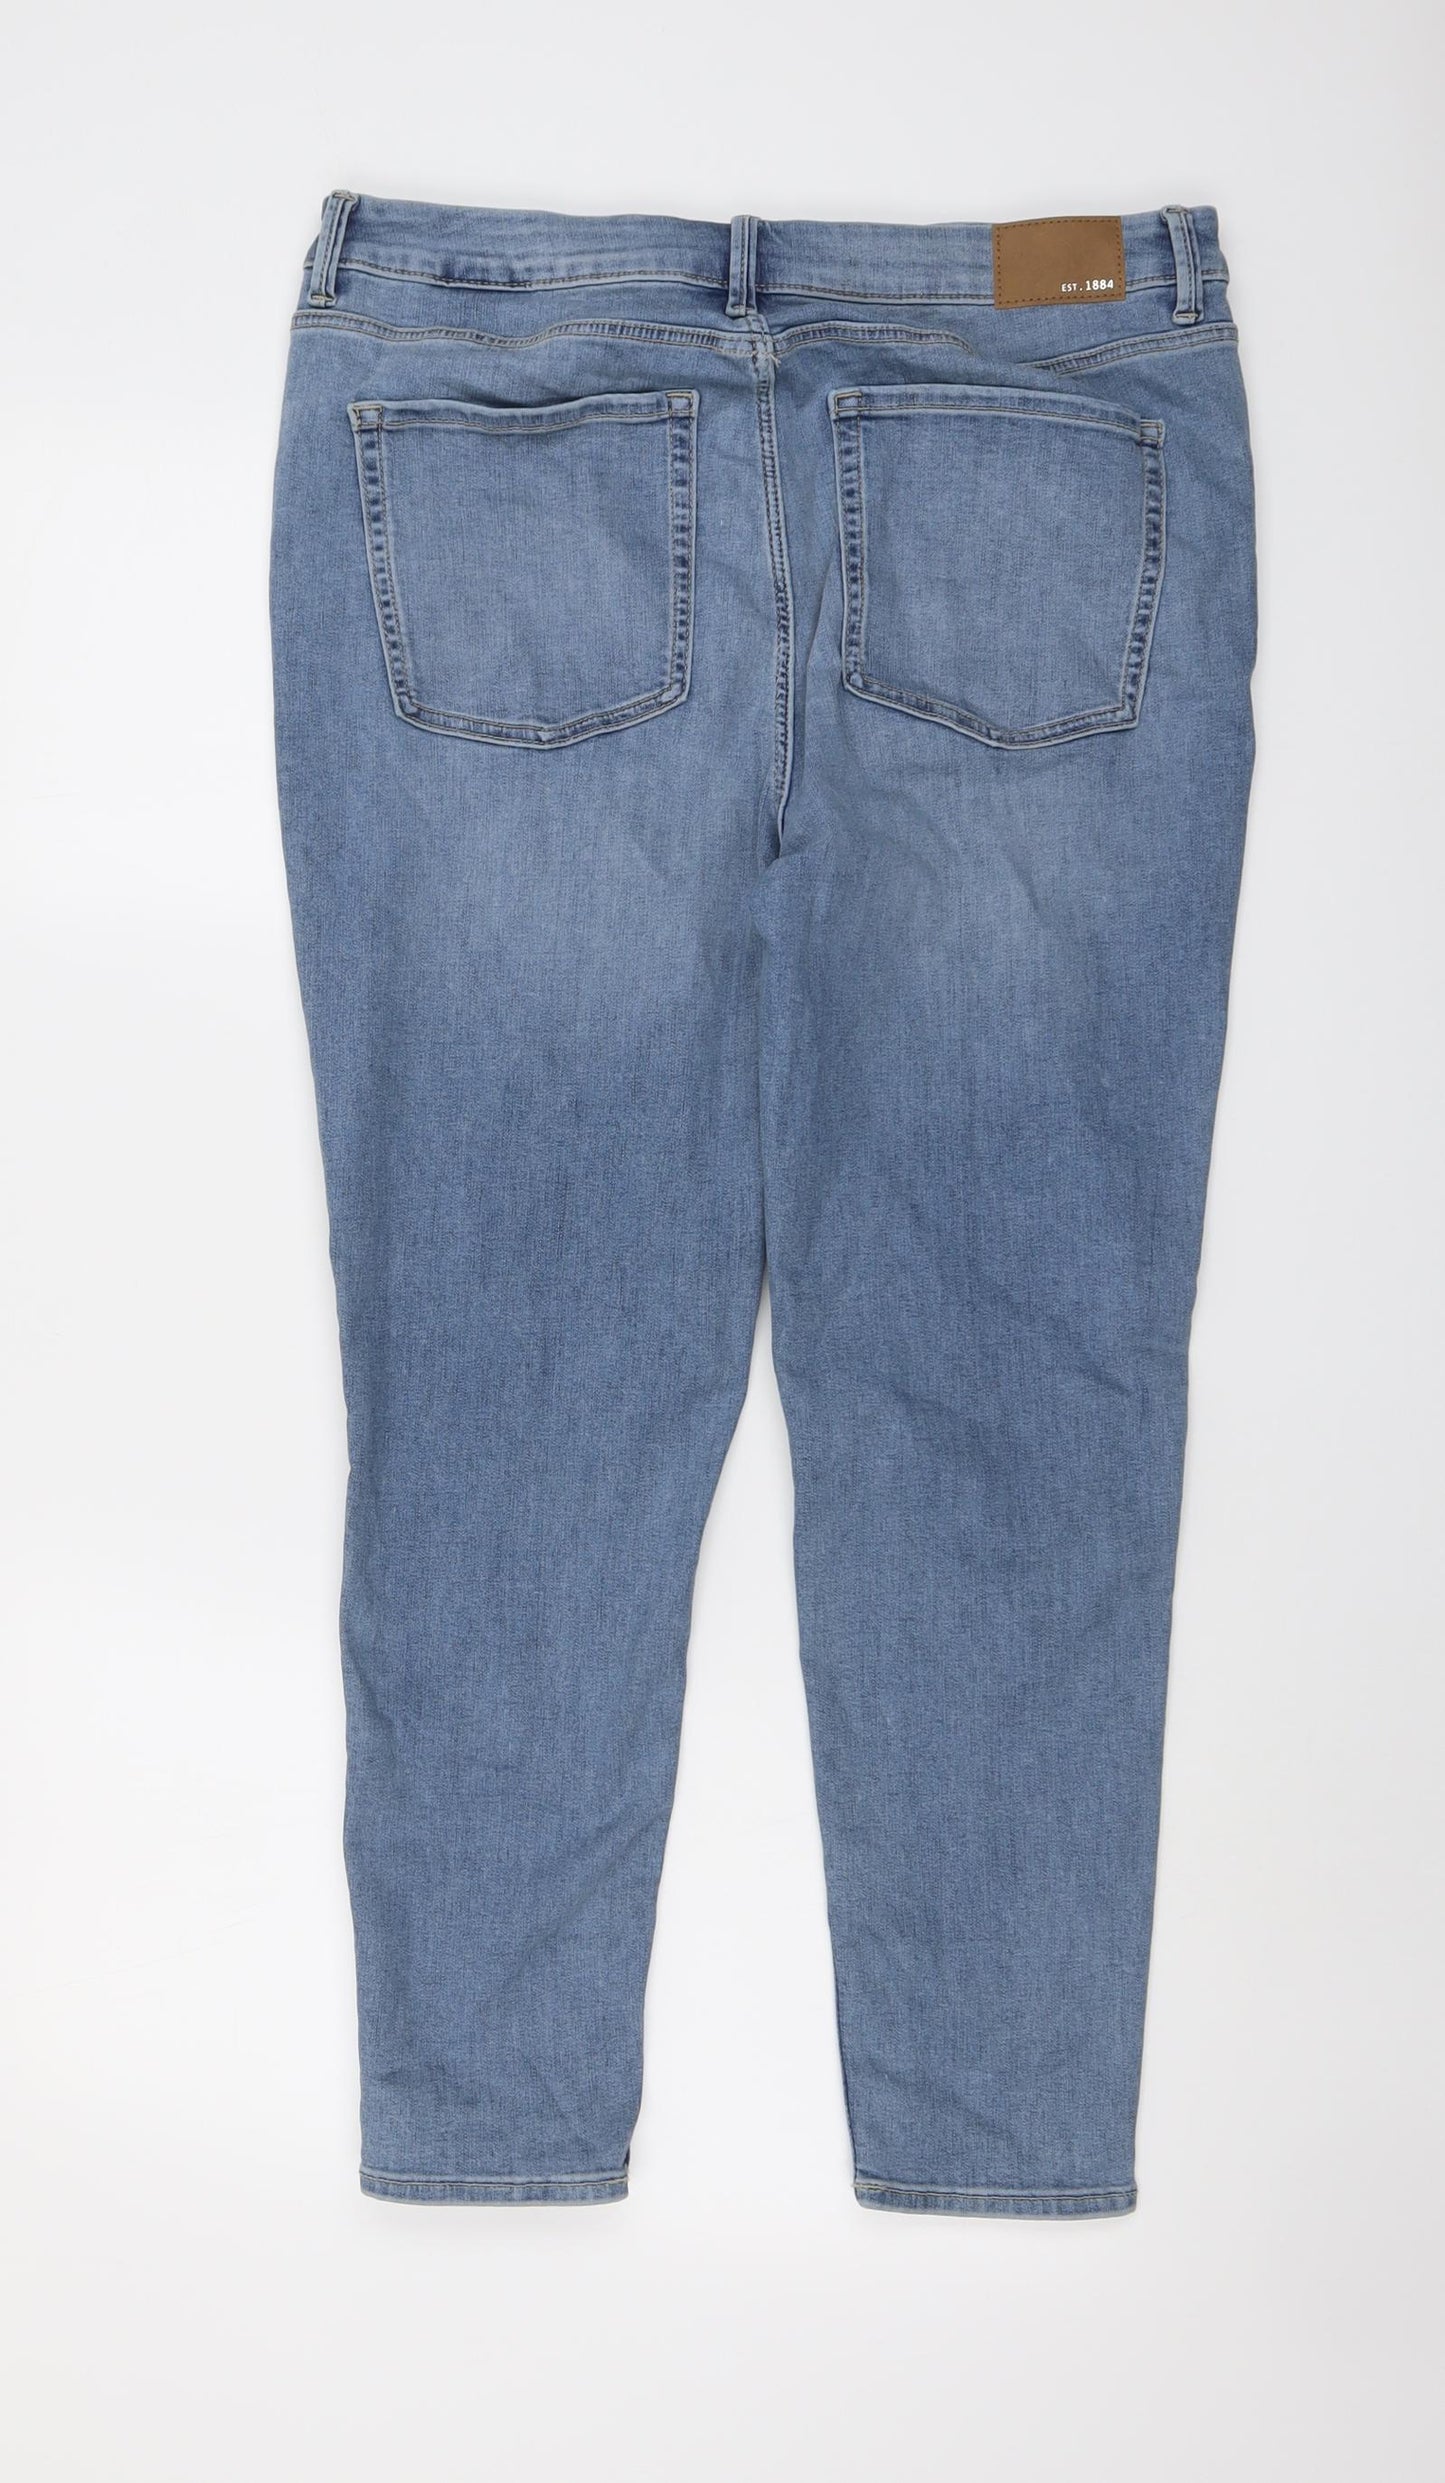 Marks and Spencer Womens Blue Cotton Skinny Jeans Size 16 L25 in Regular Button